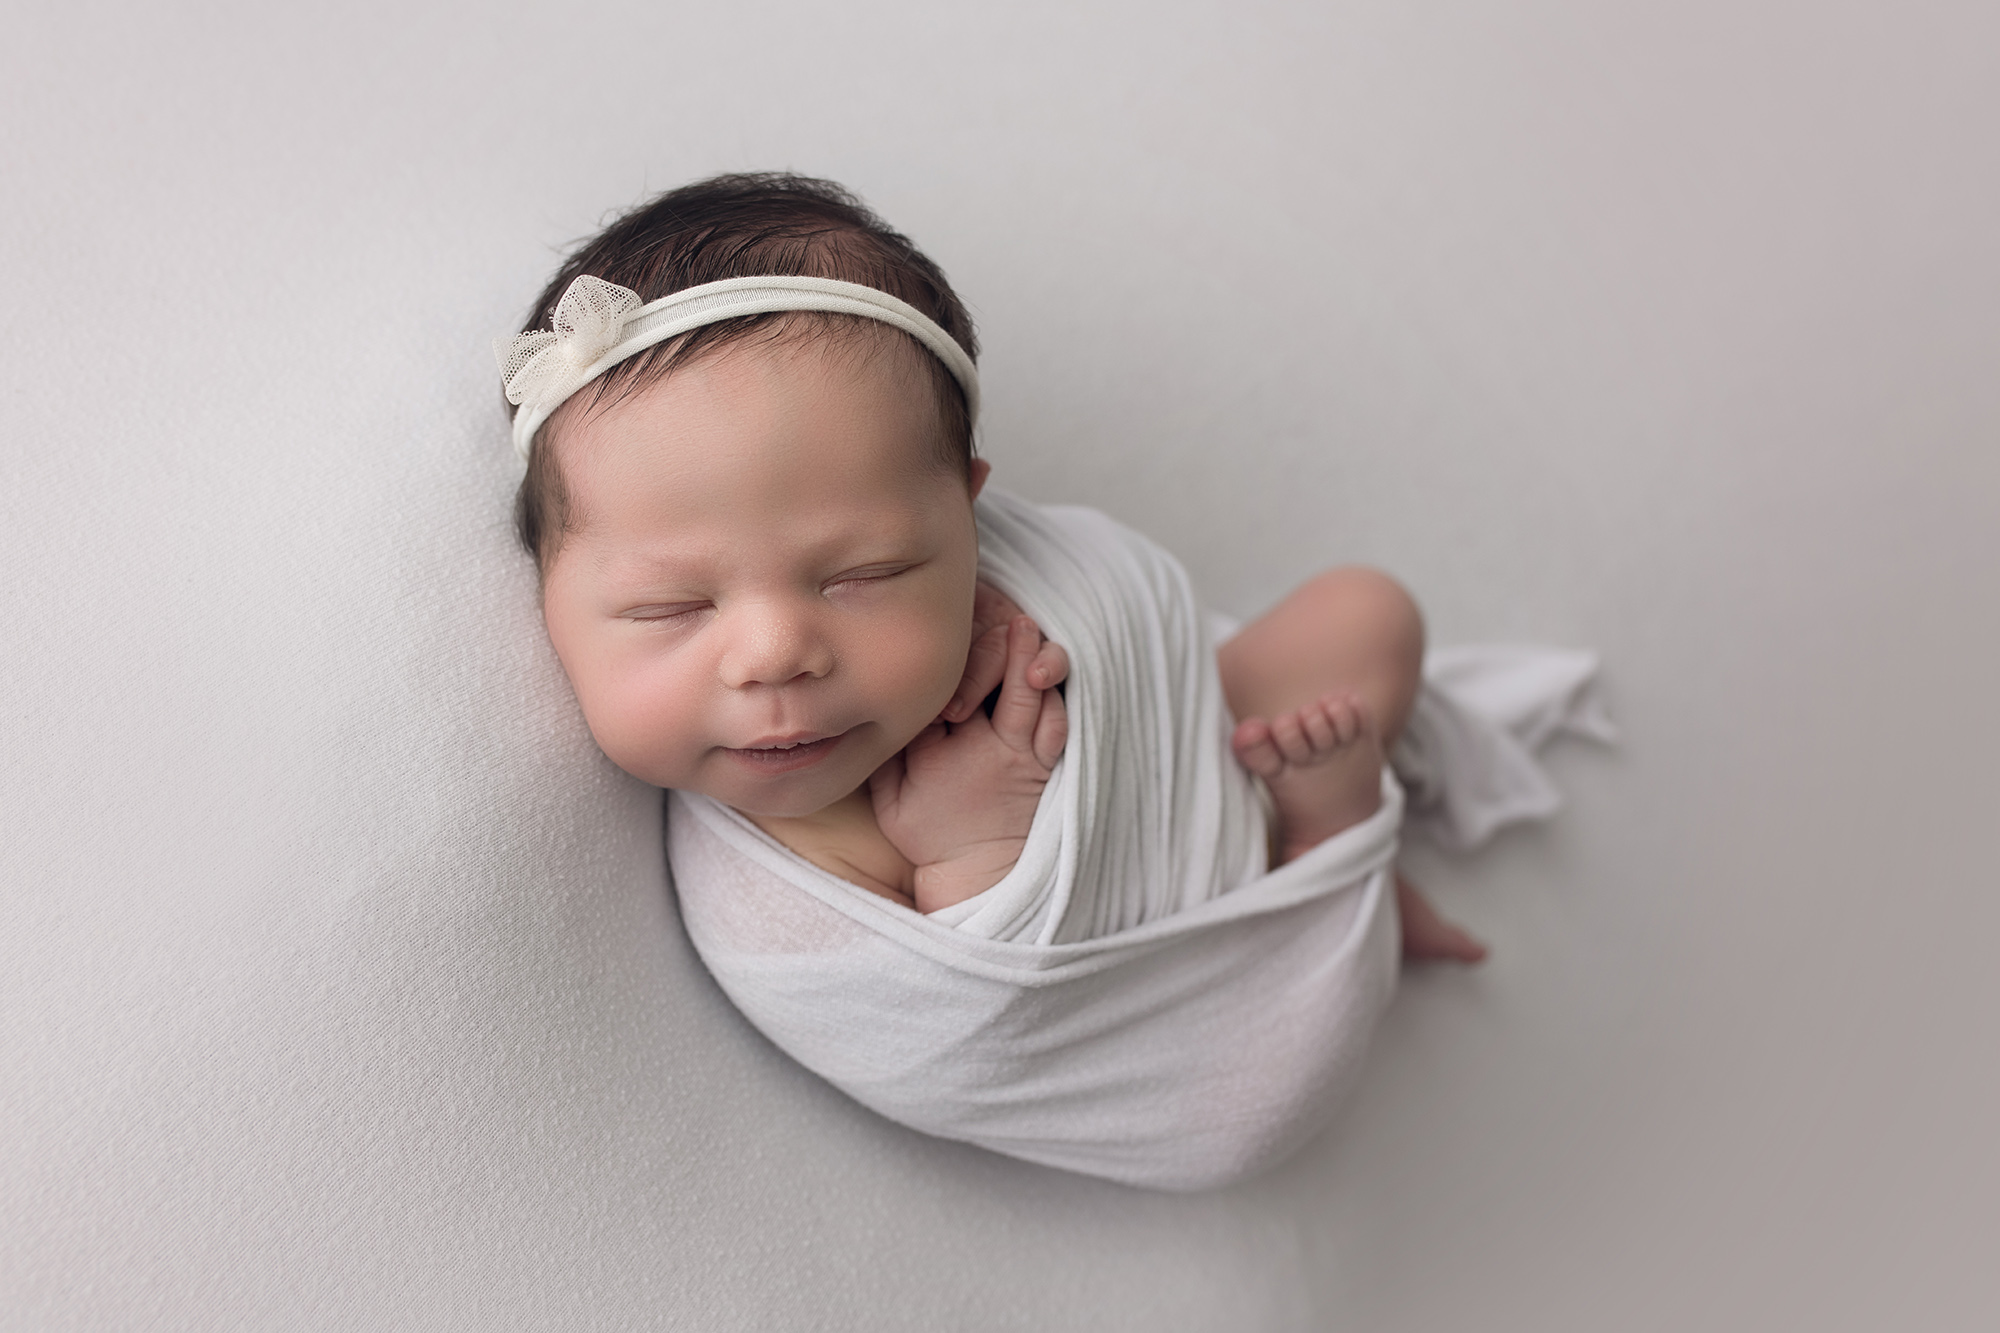 newborn baby girl wrapped in white wrap and white headband